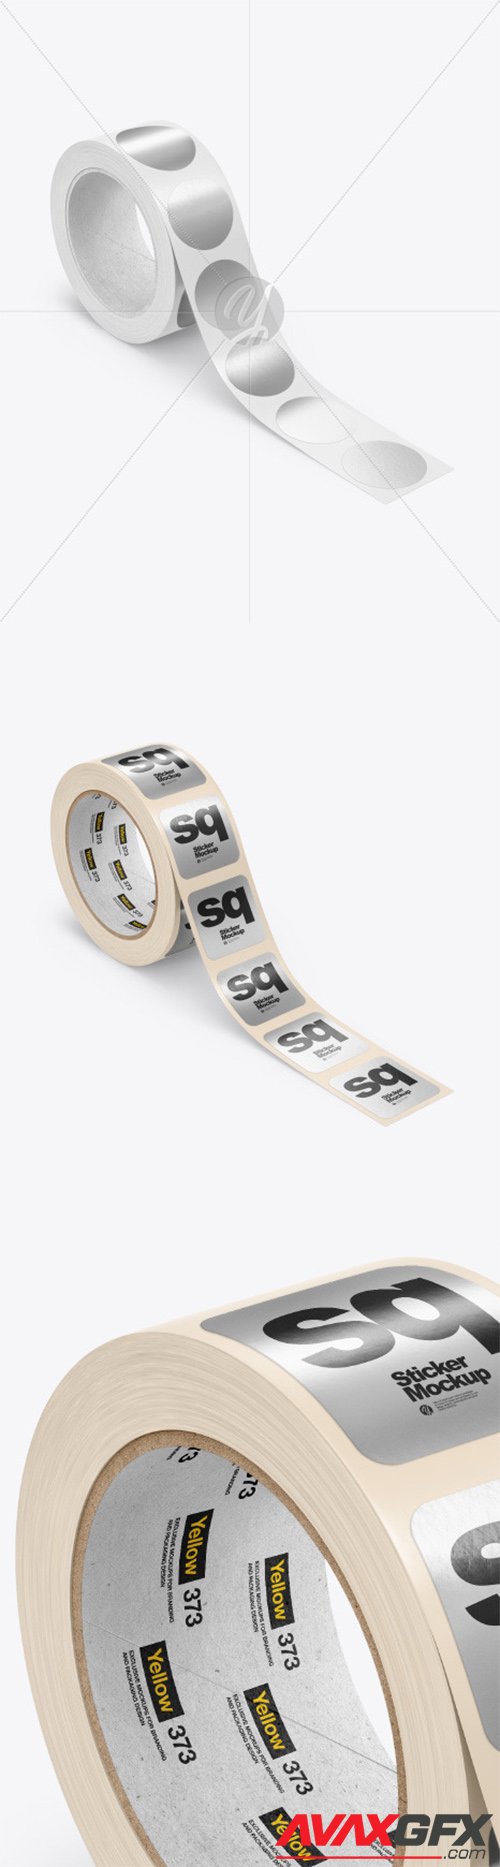 Roll with Metallic Stickers Mockup 81901